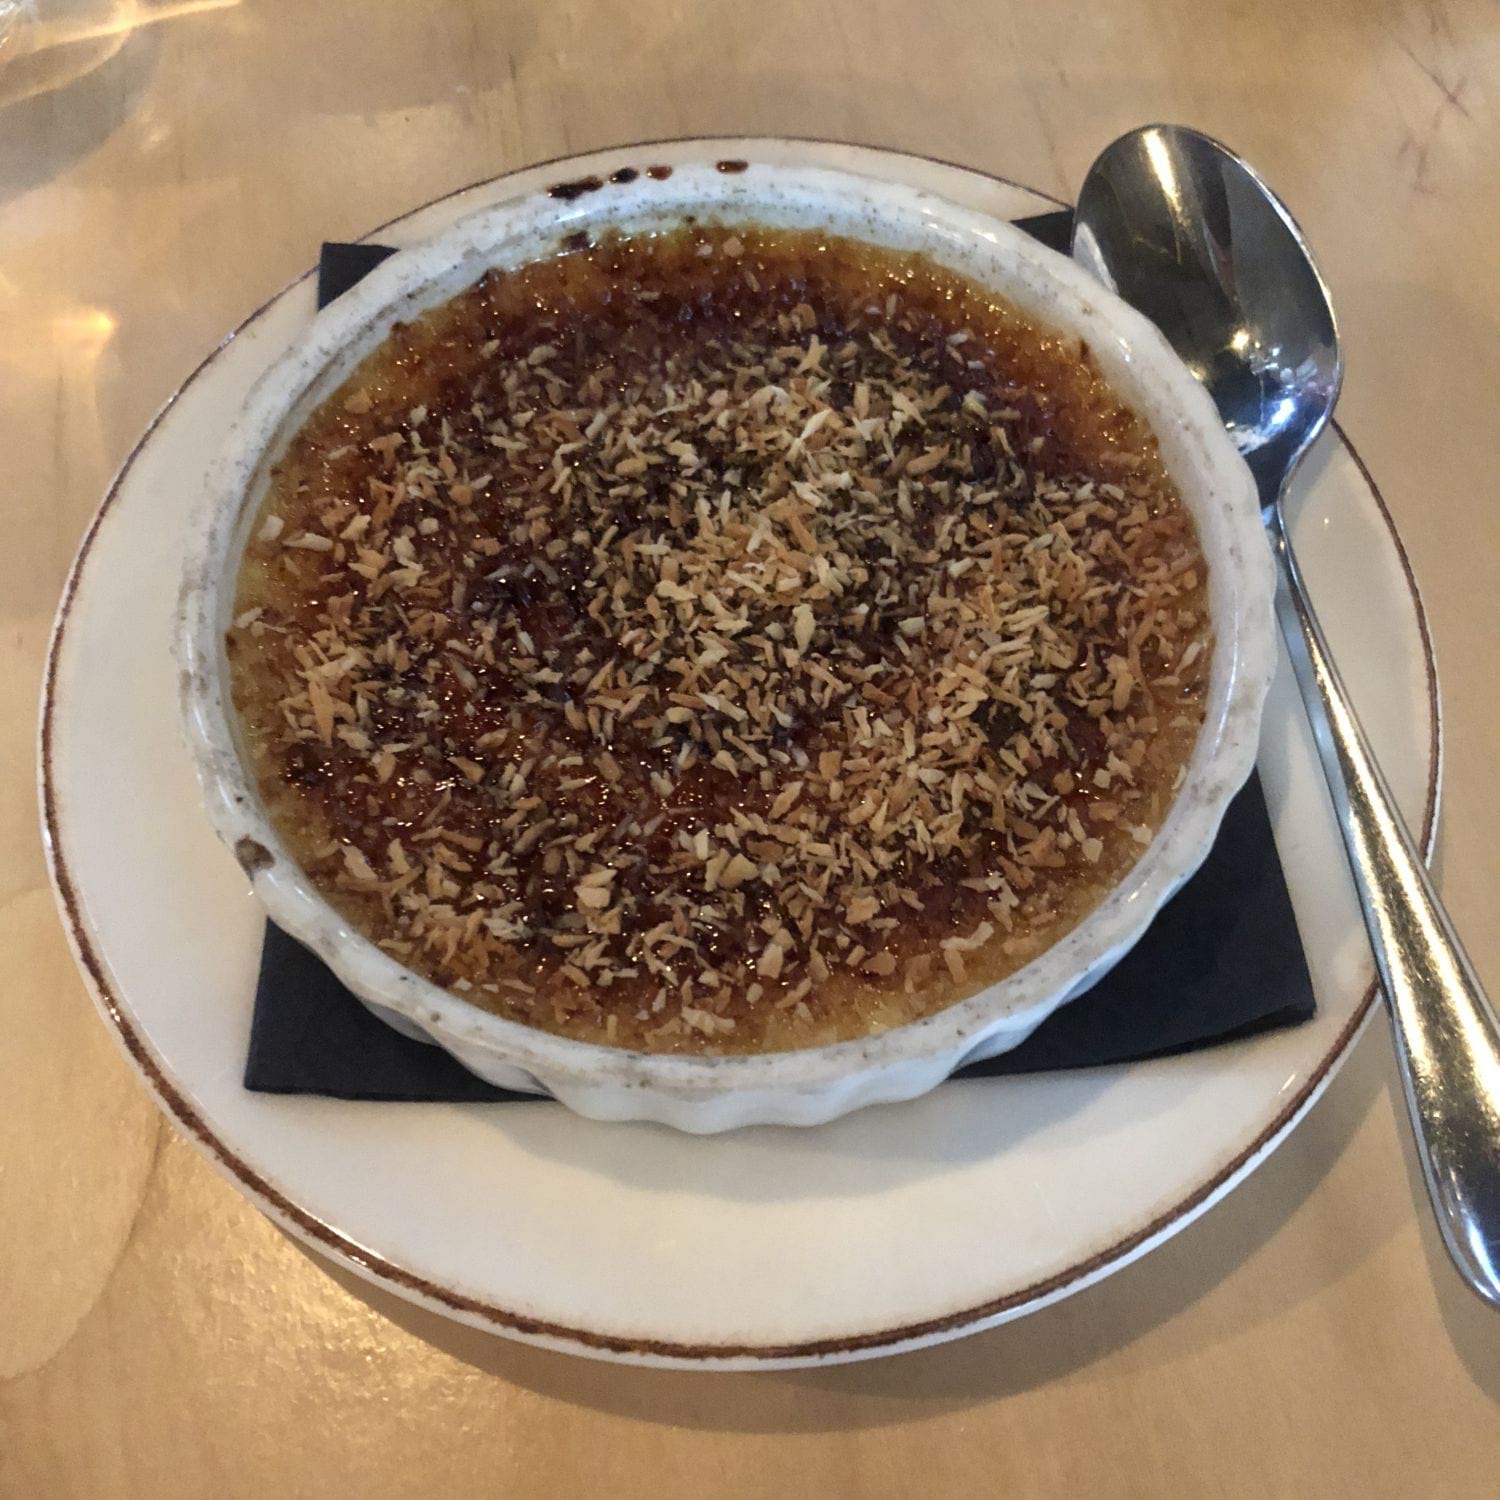 Kokos-creme brulee – Photo from Barbro by Sophie E. (17/10/2018)